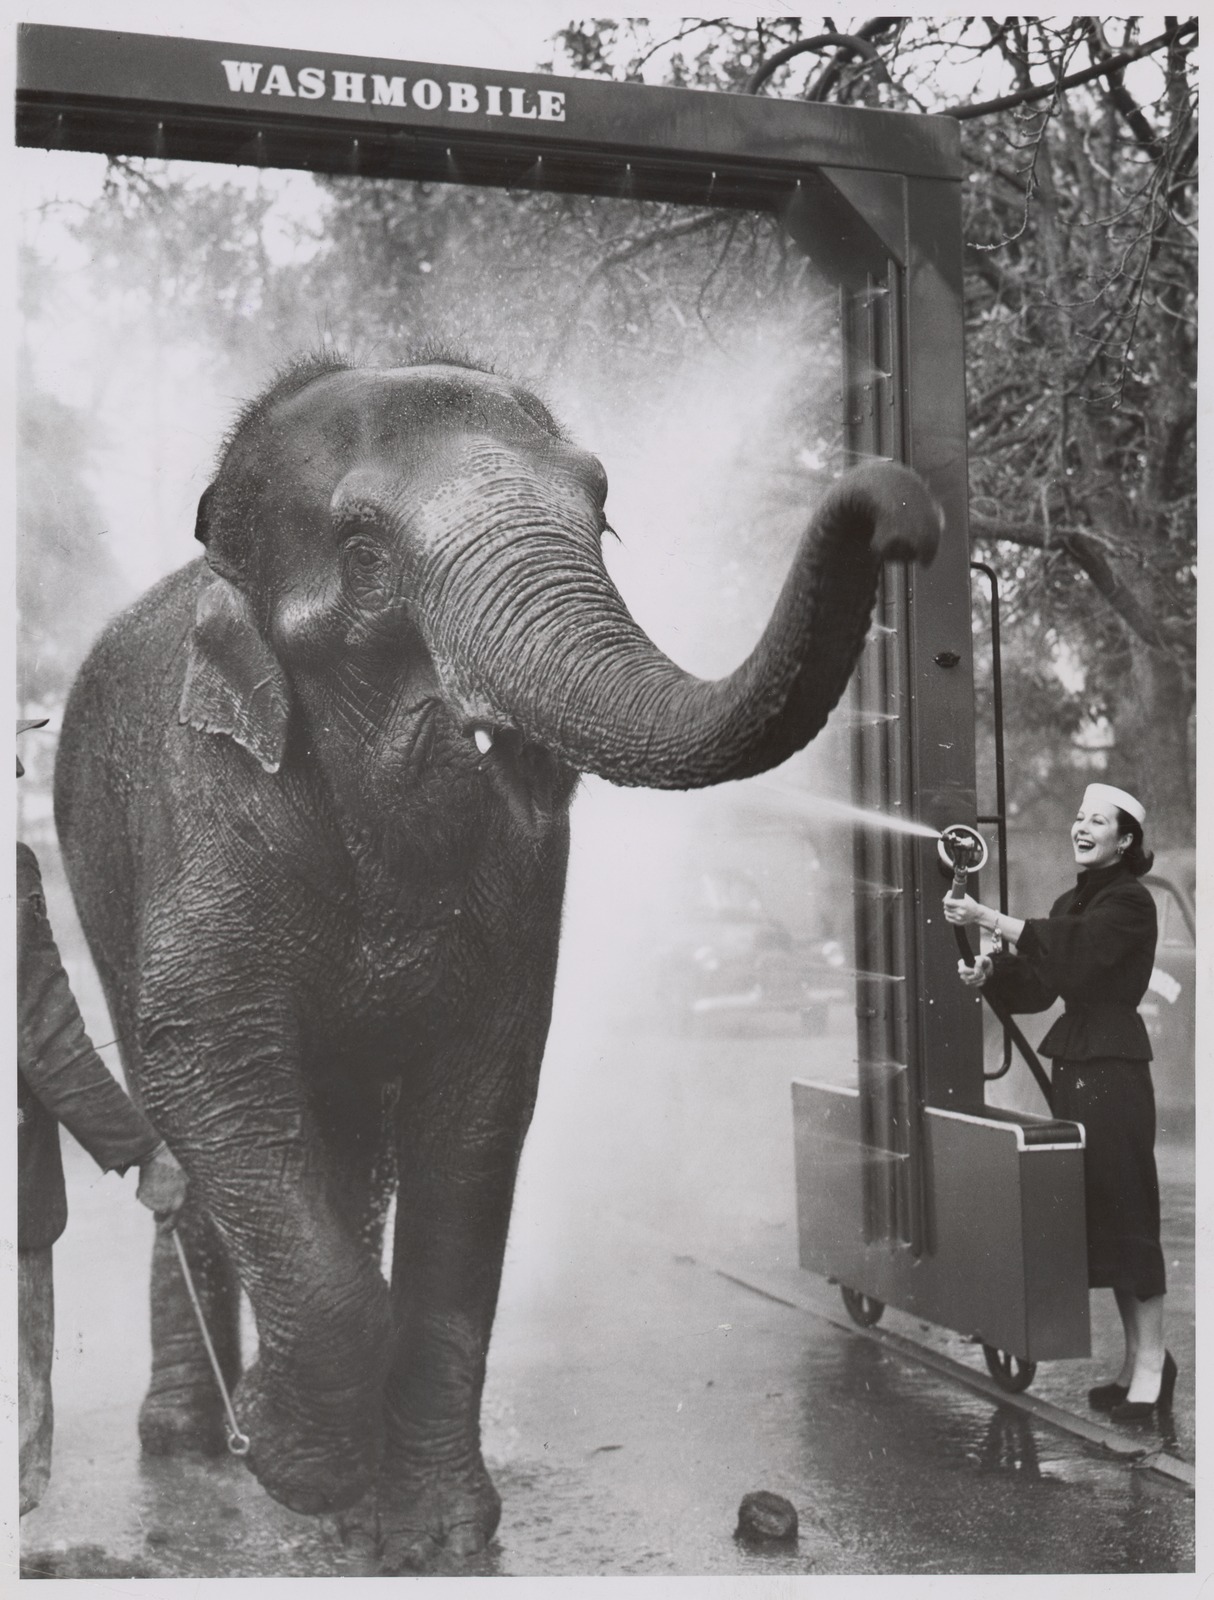 Includes Felina Kennedy holding the hose as Peggy walks through the "Washmobile"; Peggy being coaxed by keepers Carl Mackaway and Bill Craig